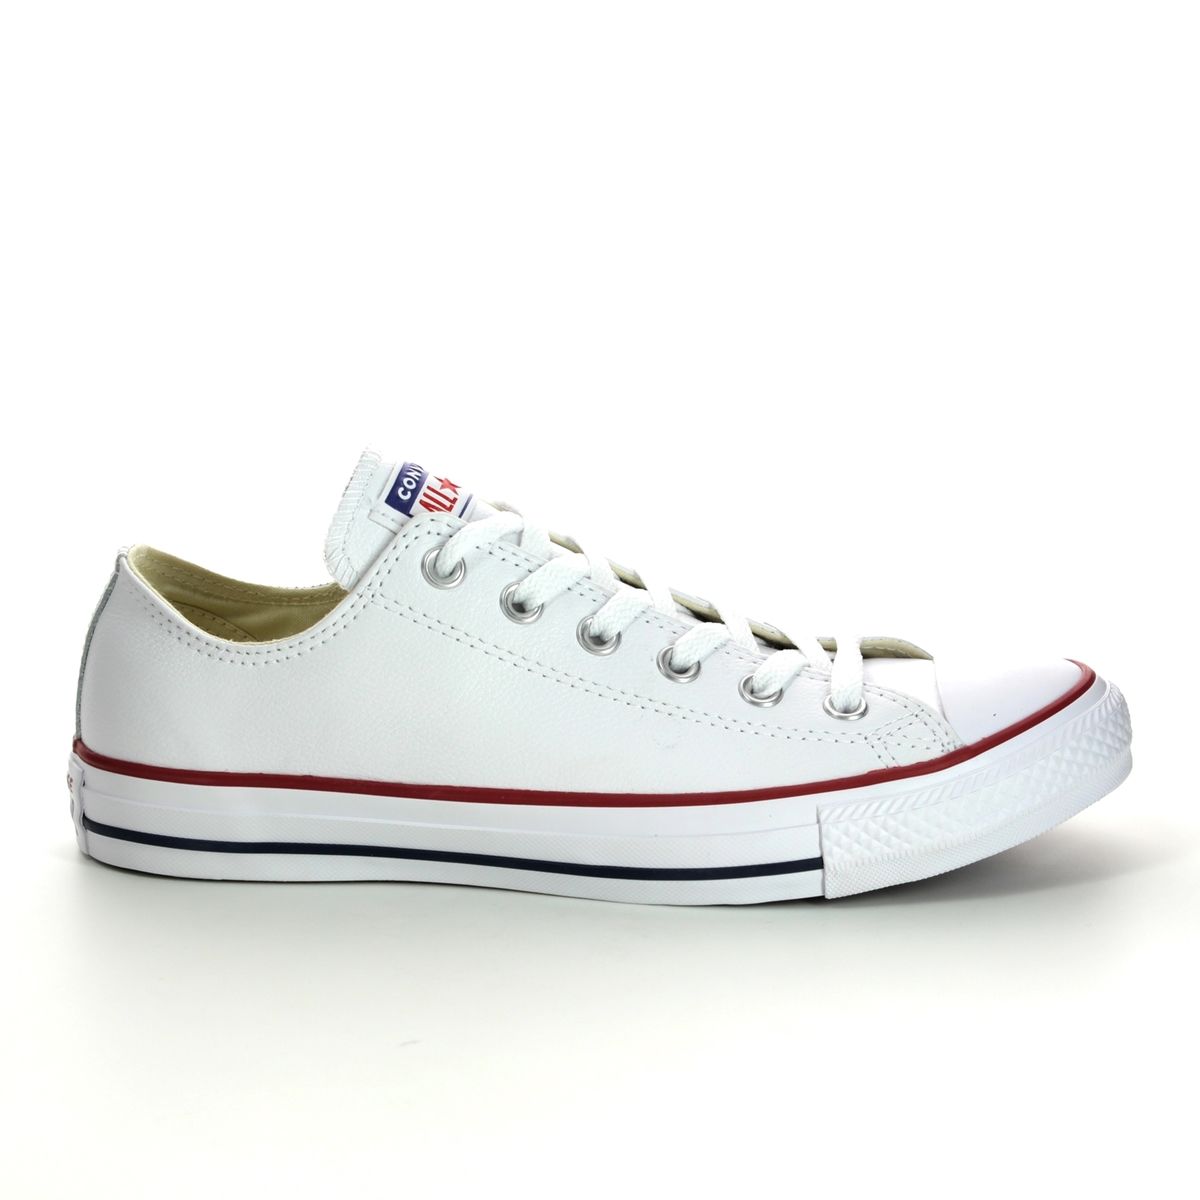 Converse Allstar Ox 132173C White Leather Trainers